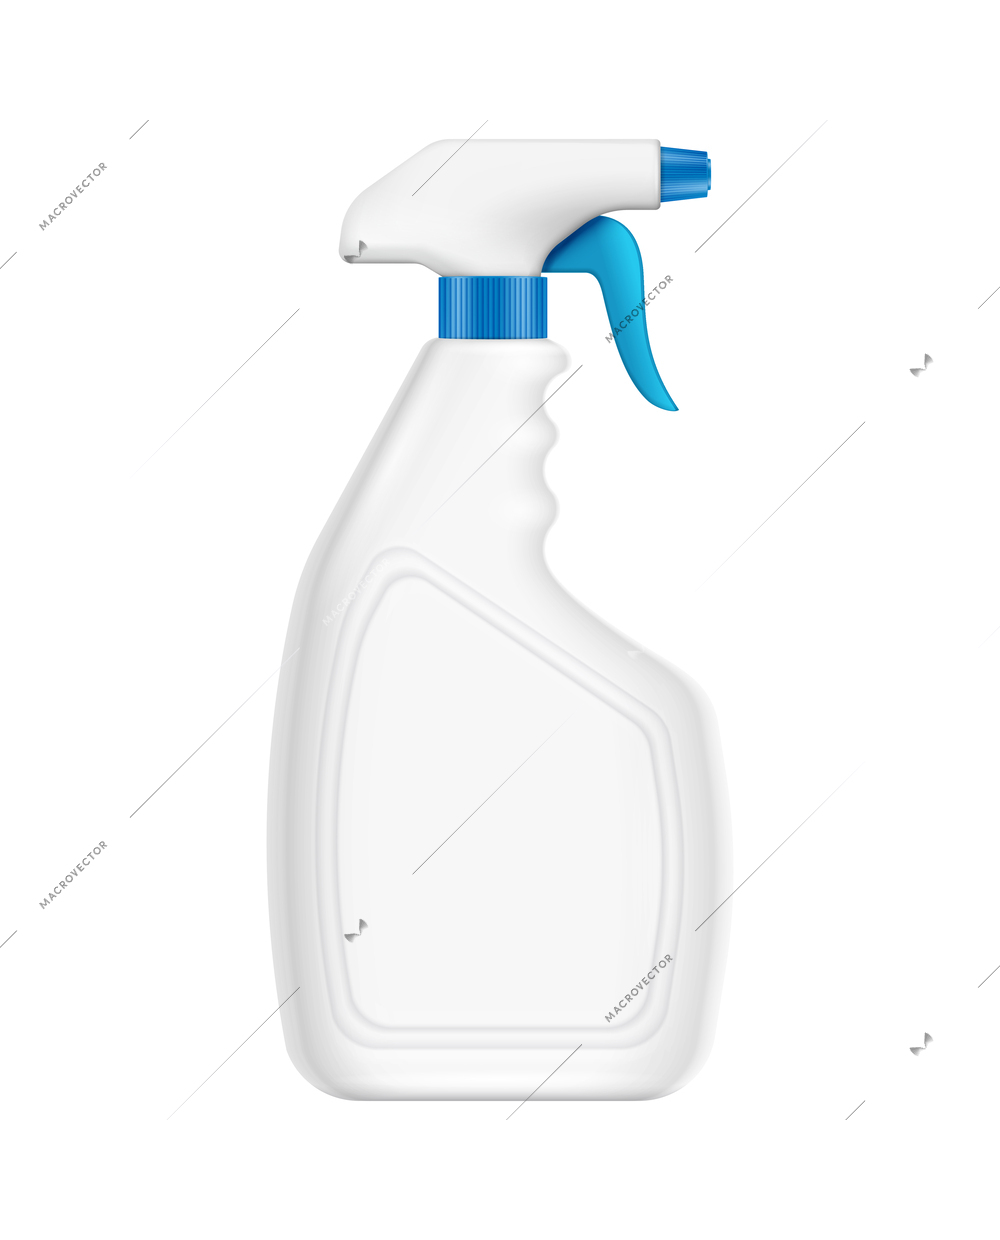 Blank plastic spray bottle for detergent or cleaning agent realistic vector illustration